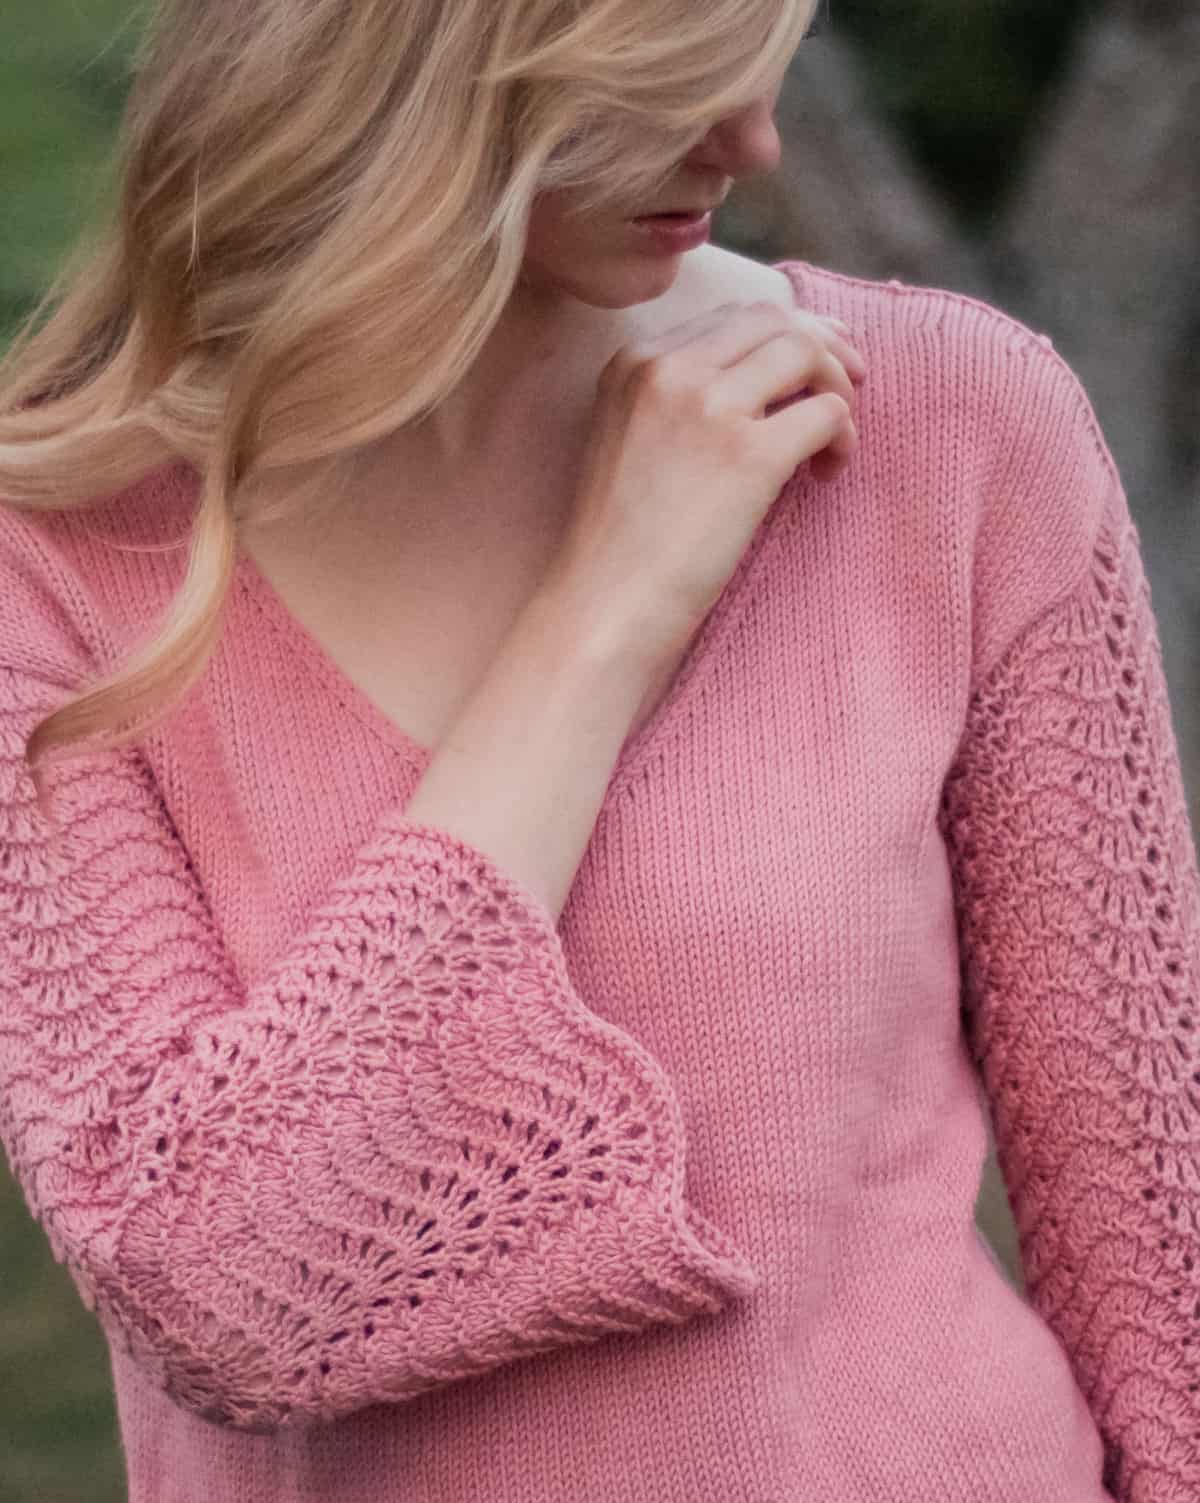 aria sweater detail image showing the lace on the sleeves